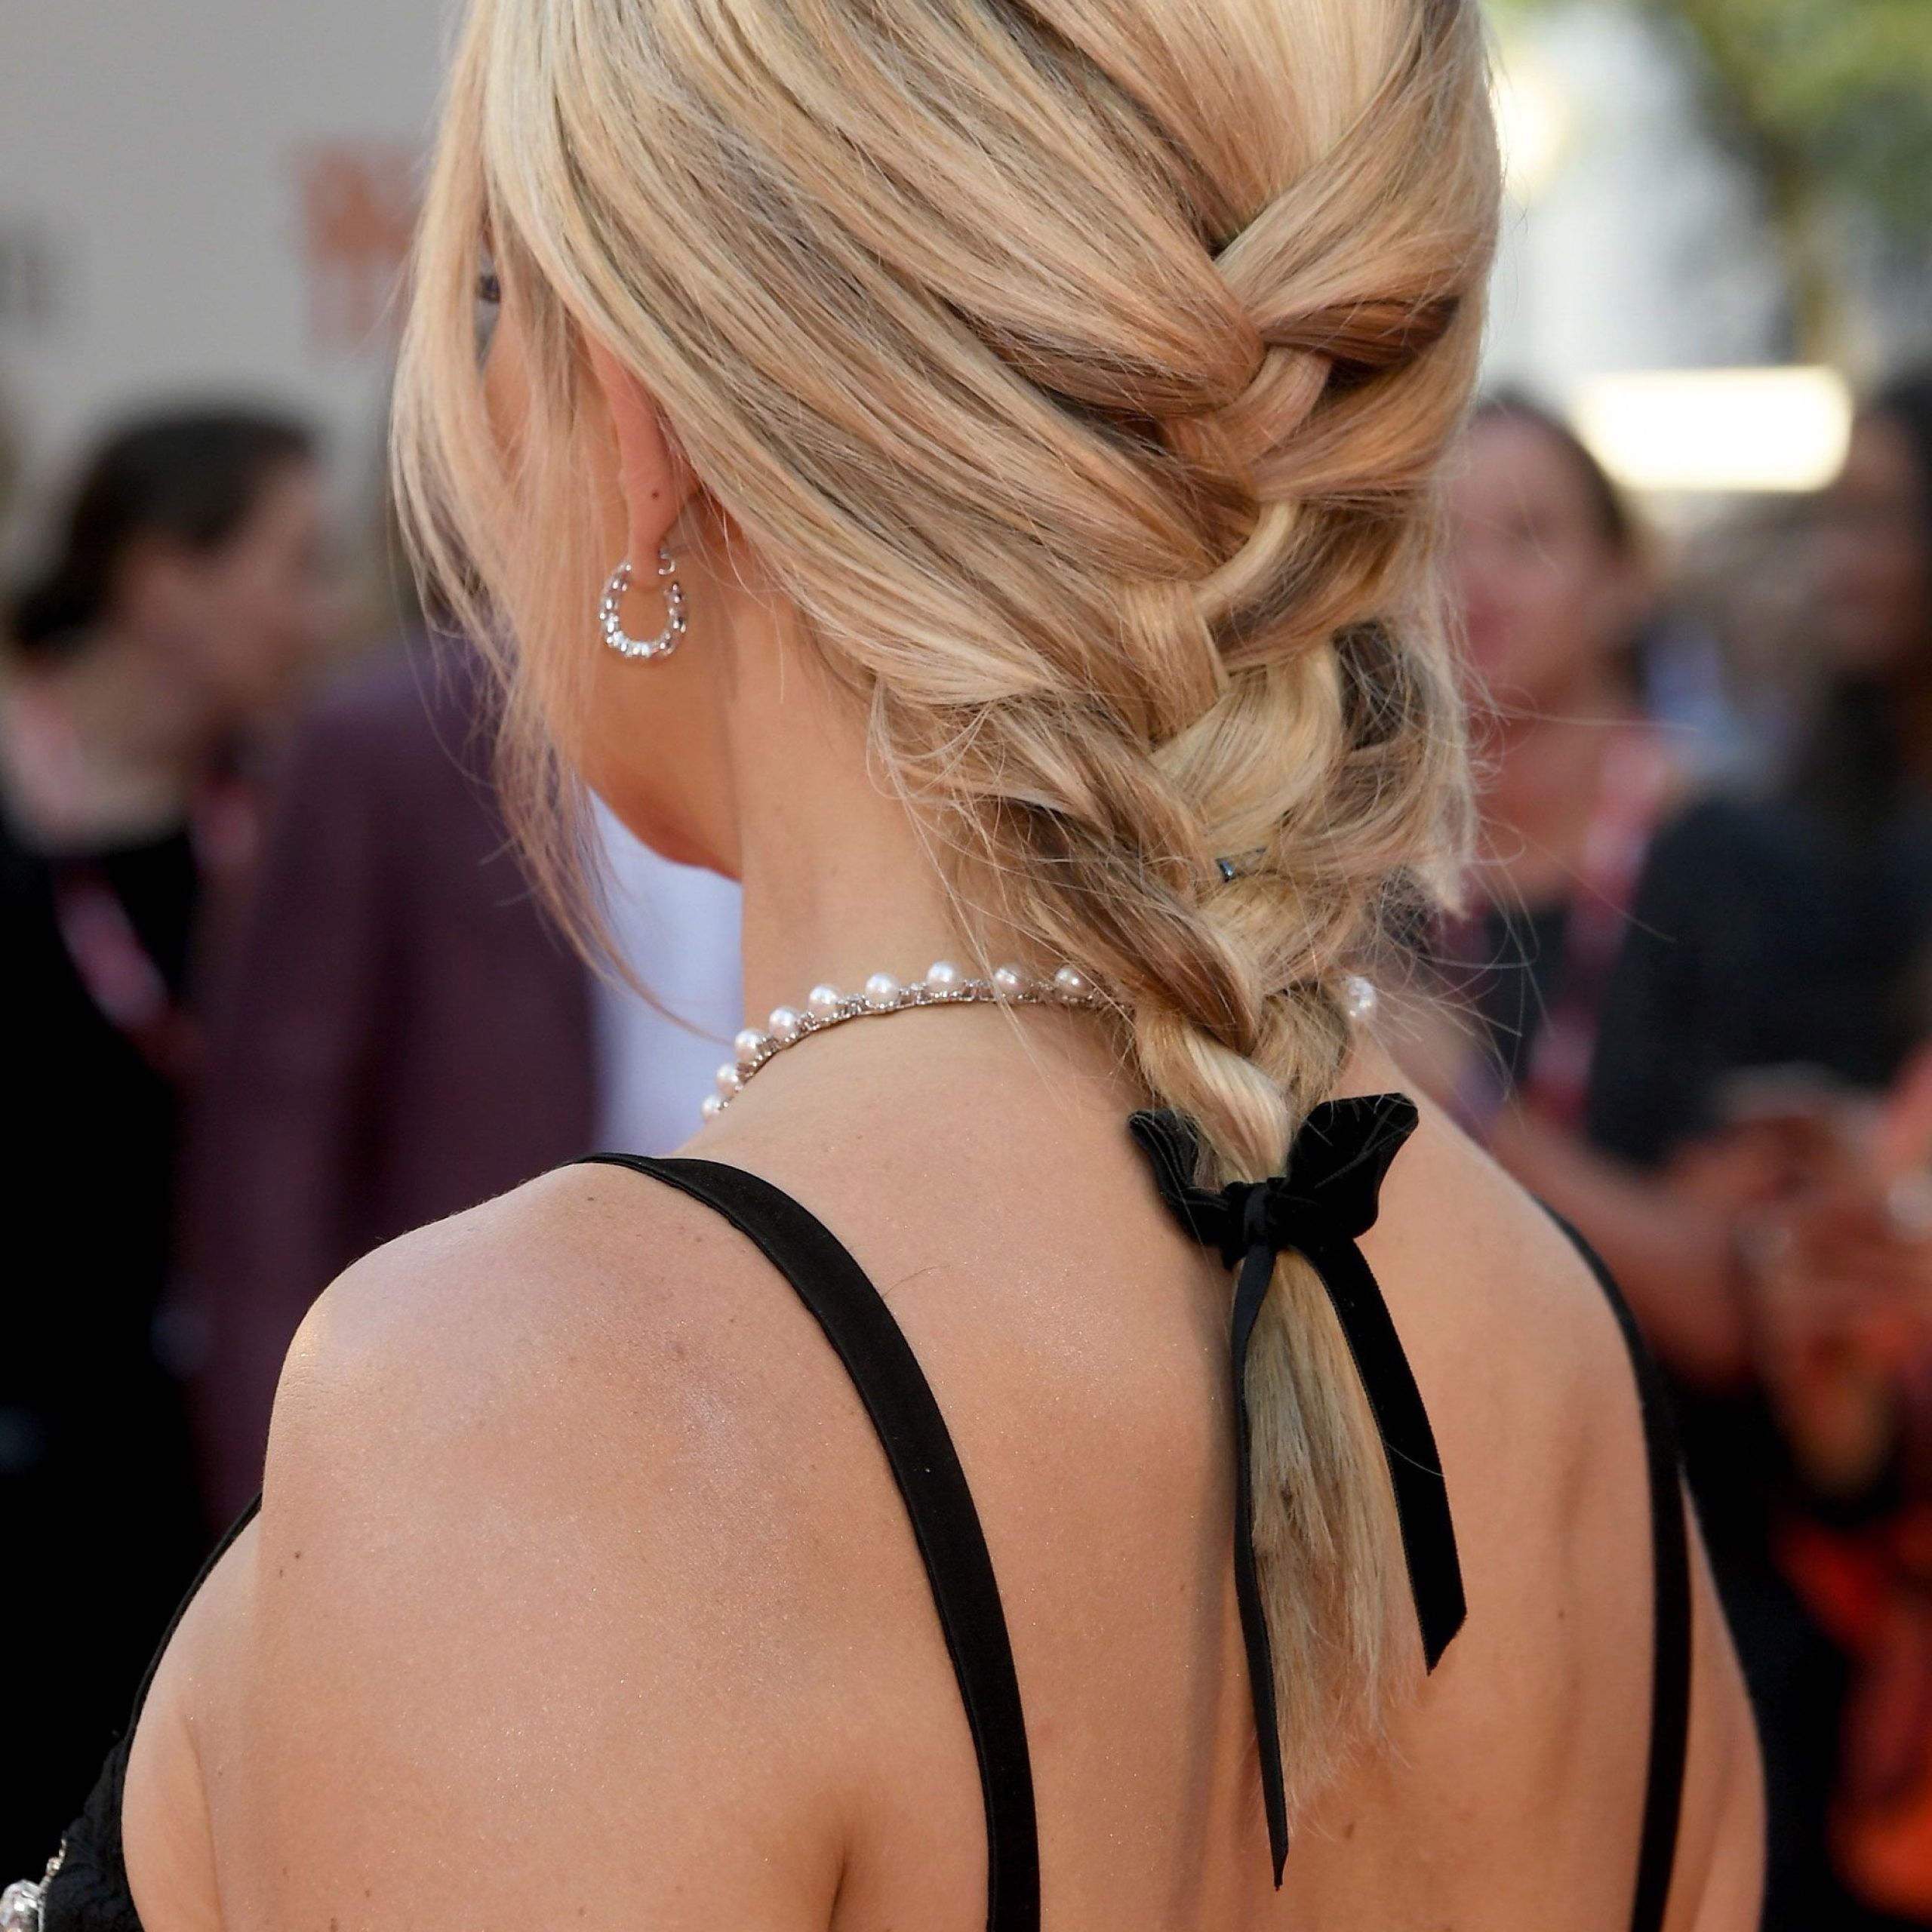 35 Easy Updo Hairstyles – Elegant Updos Inspiredcelebrities With Regard To Most Recent Ponytail Updo Hairstyles For Medium Hair (Photo 35 of 36)